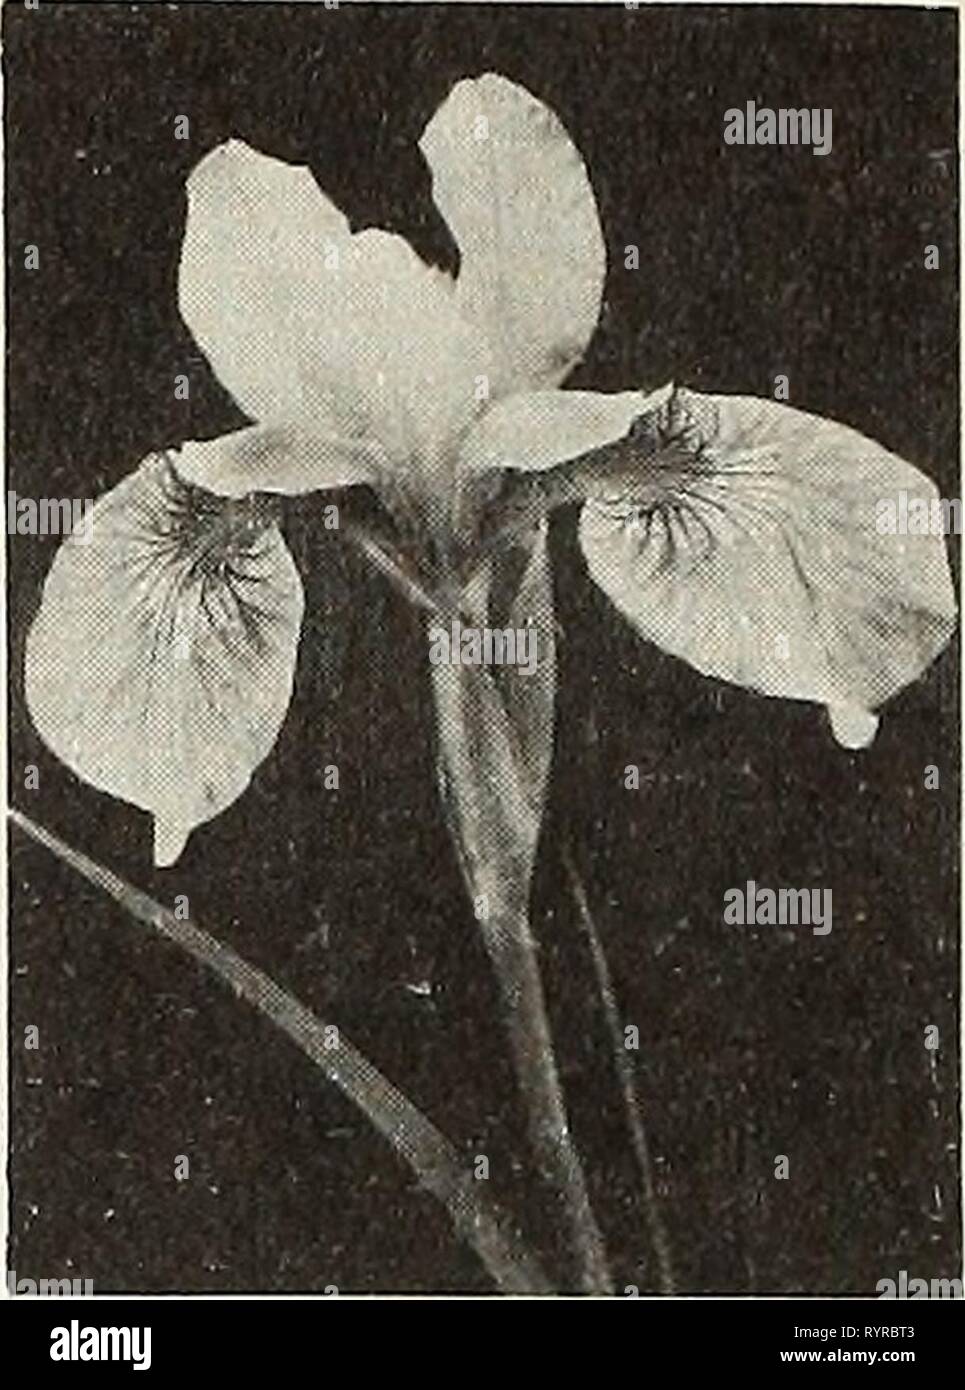 Dreer's a real old fashioned Dreer's a real old fashioned quality garden book for 1952 : to make your garden more beautiful more productive more enjoyable . dreersrealoldfas1952henr Year: 1952  4 / f %%%%.f ). f i /    Bleeding Heart Hemerocallis, Mikado Siberian Iris, Caesar's Brother ^e prepay transportat ion on perennial plants amount- ing to $3.00 or more east of the Mississippi. On all orders of perennial plants for less than $3.00, and west of the M ississippi, add 35c for packing and postage. Aconitum—Monksfiood Dreer's Select HARDY PERENNIAL PLANTS Stock Photo